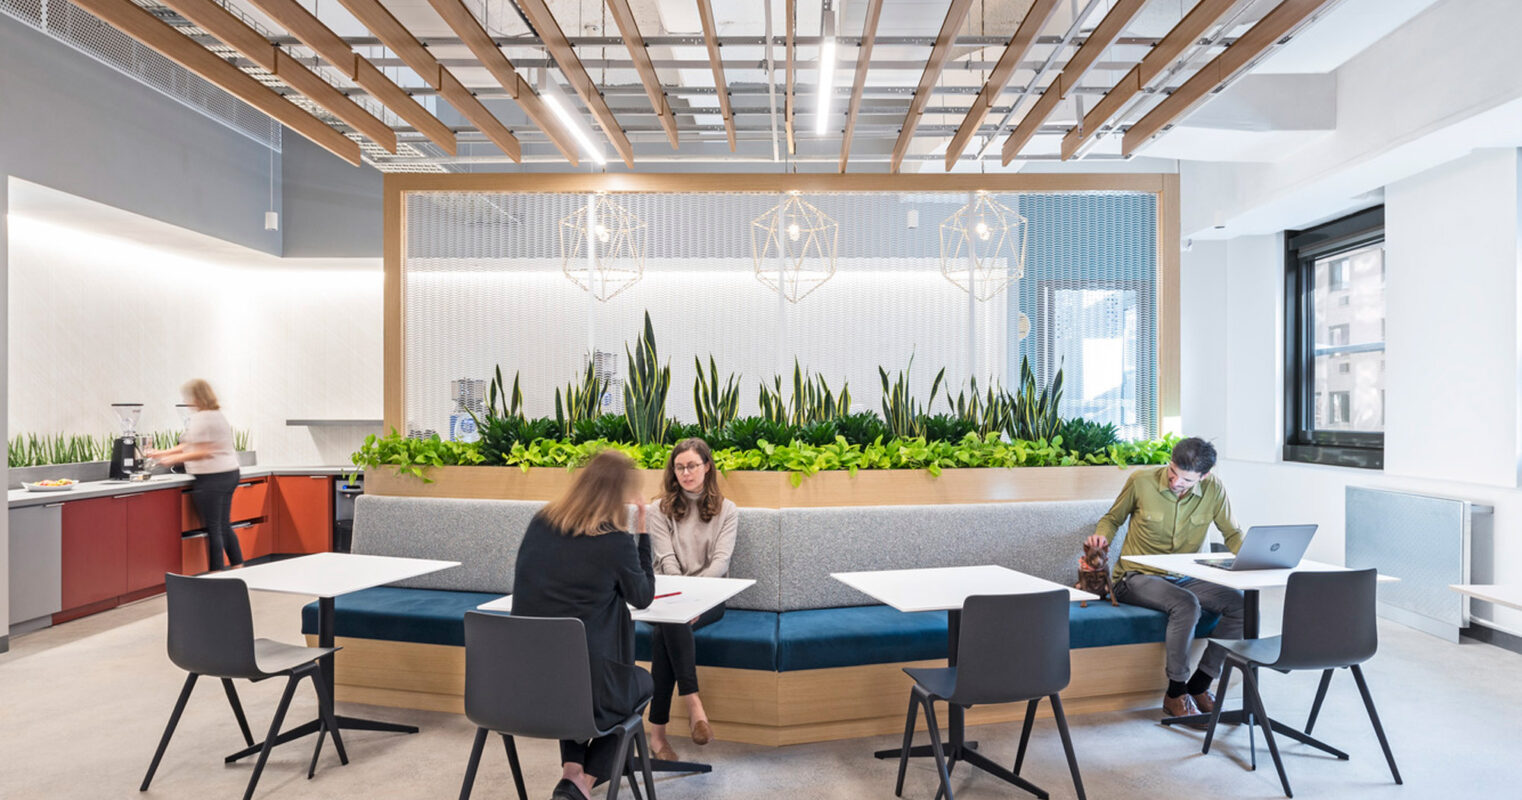 Modern office break room with warm wooden accents, geometric pendant lighting, and a vibrant green plant wall. Individuals collaborate and work independently, complemented by sleek black seating and a striking exposed ceiling.